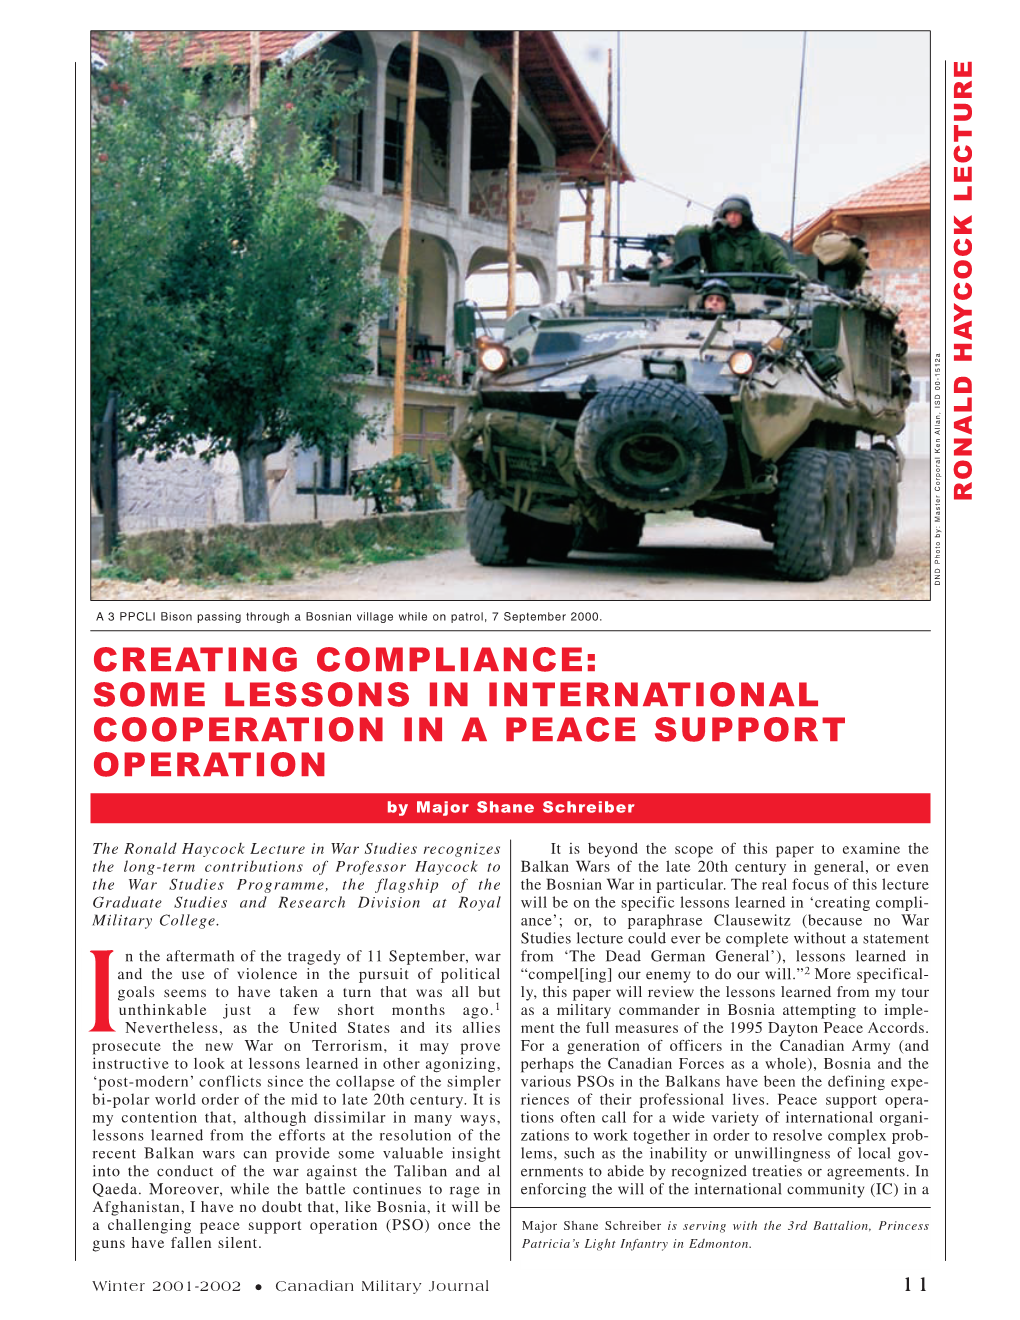 Creating Compliance: Some Lessons in International Cooperation in a Peace Support Operation